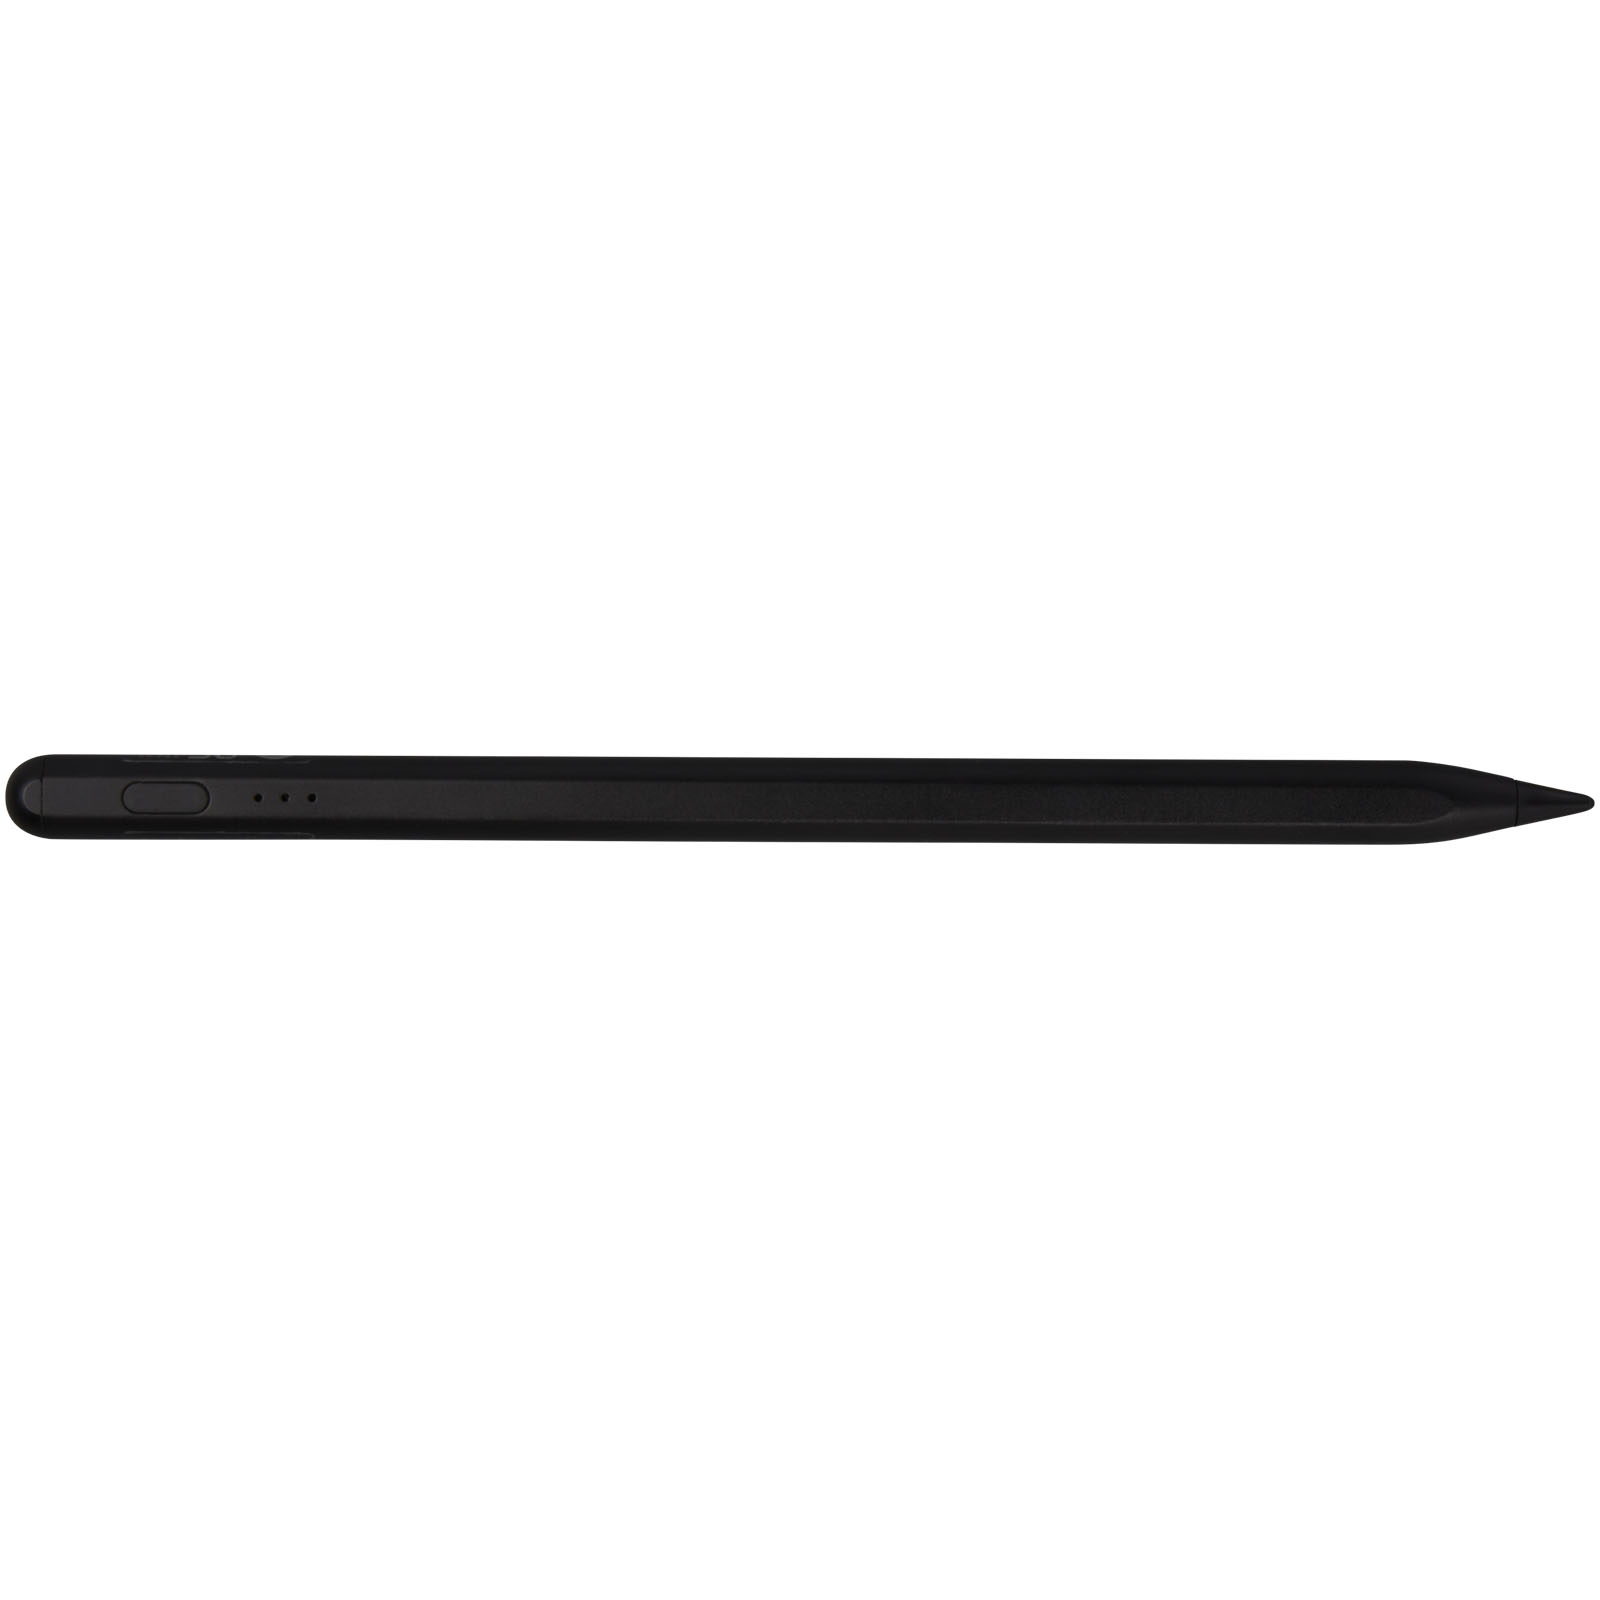 Advertising Telephone & Tablet Accessories - Hybrid Active stylus pen for iPad - 2